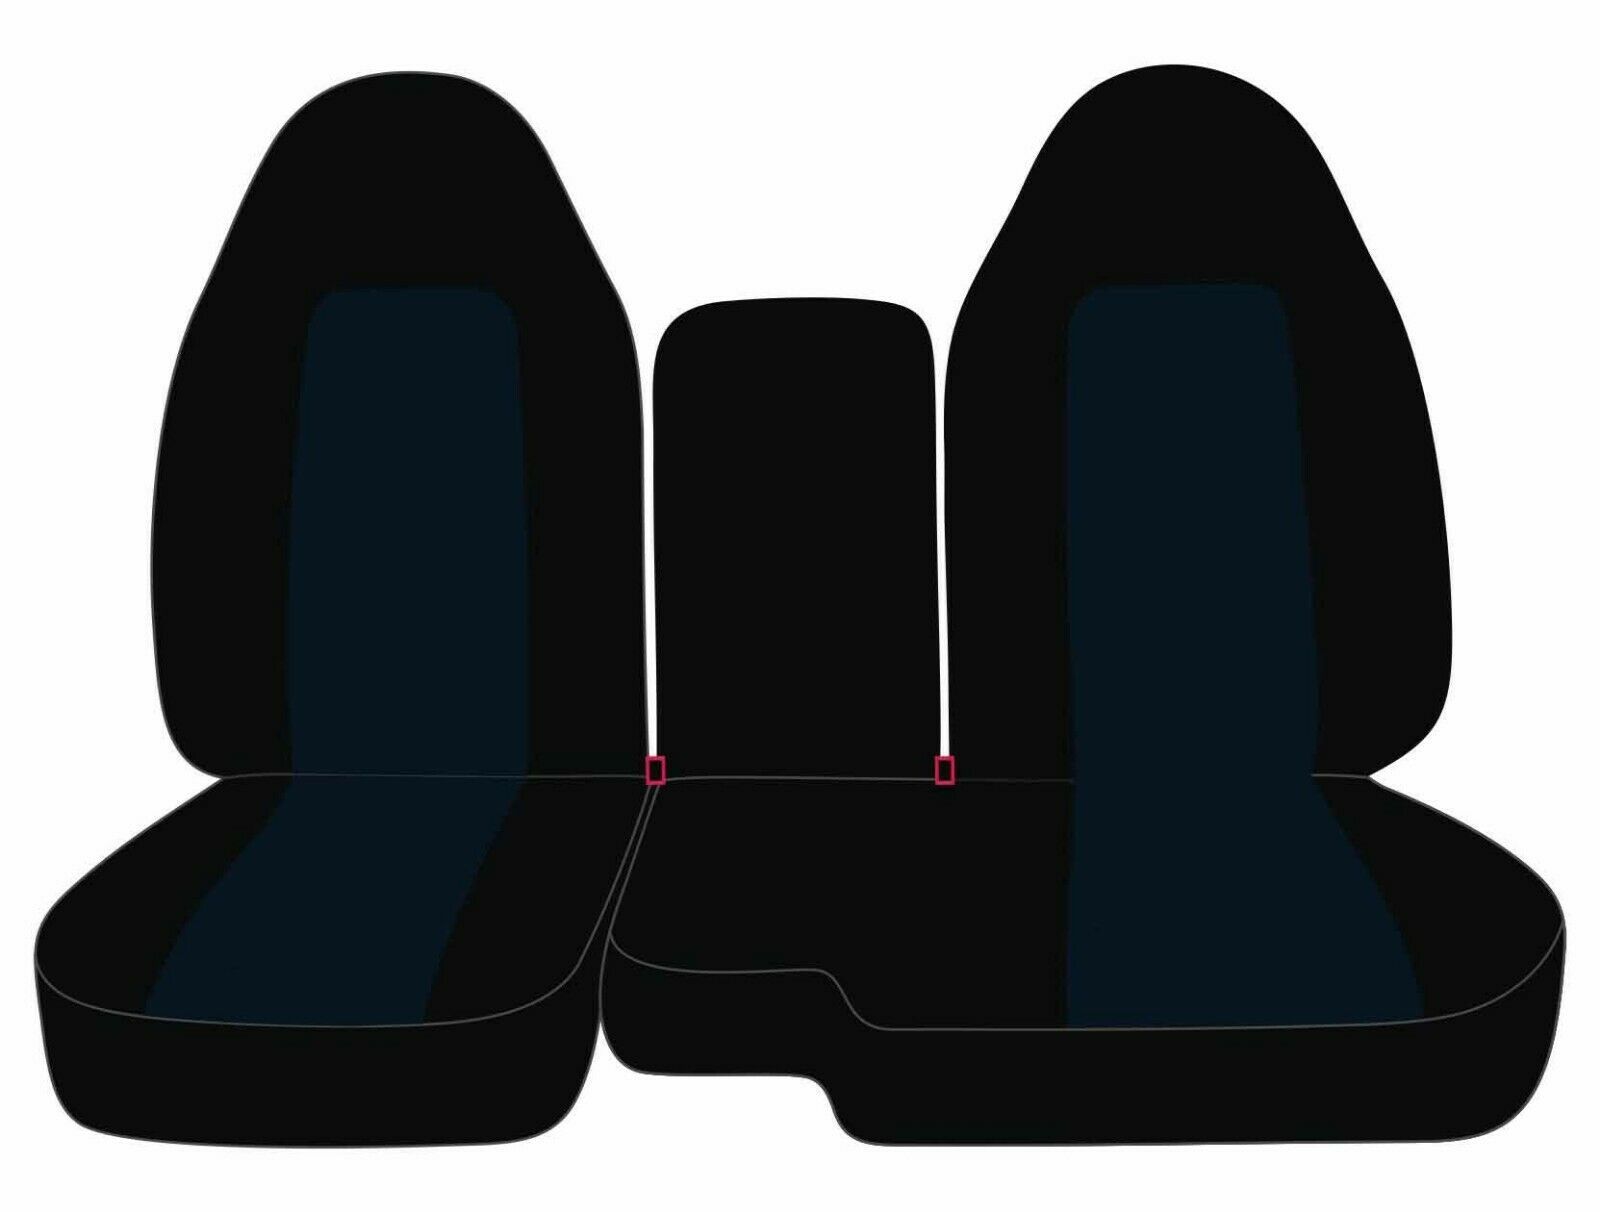 Designcovers - Front set car seat covers fits ford ranger 1991-2012  60/40 highback  black-navy